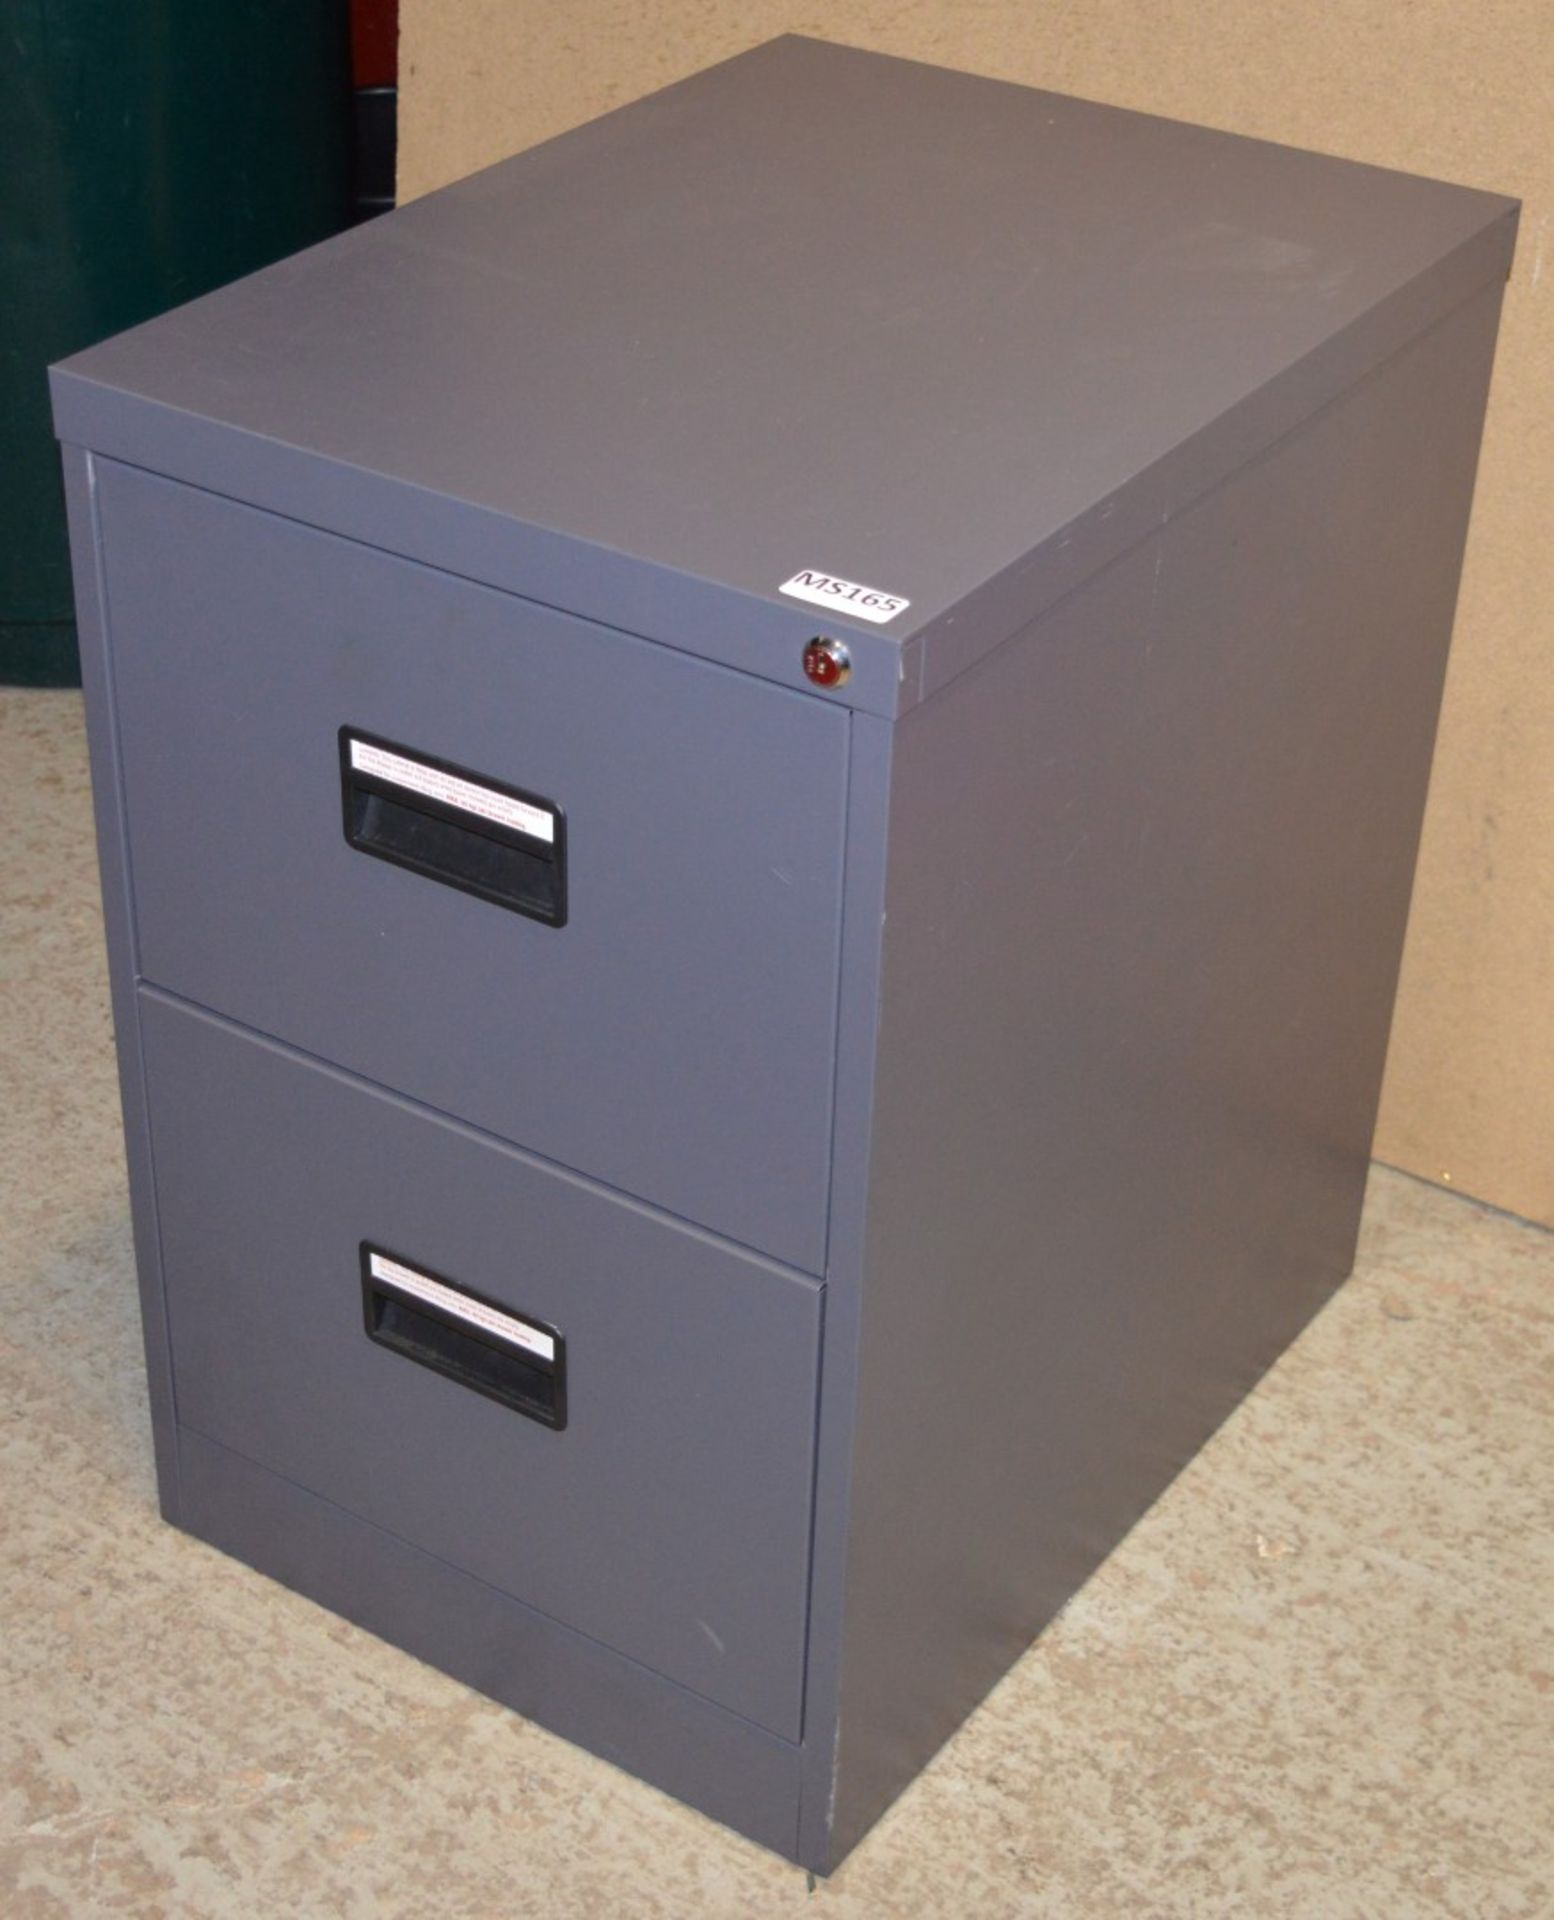 1 x Set of Metal Office Drawers - Contemporary Grey Coated Finish - H72 x W46 x D62 cms - CL282 -